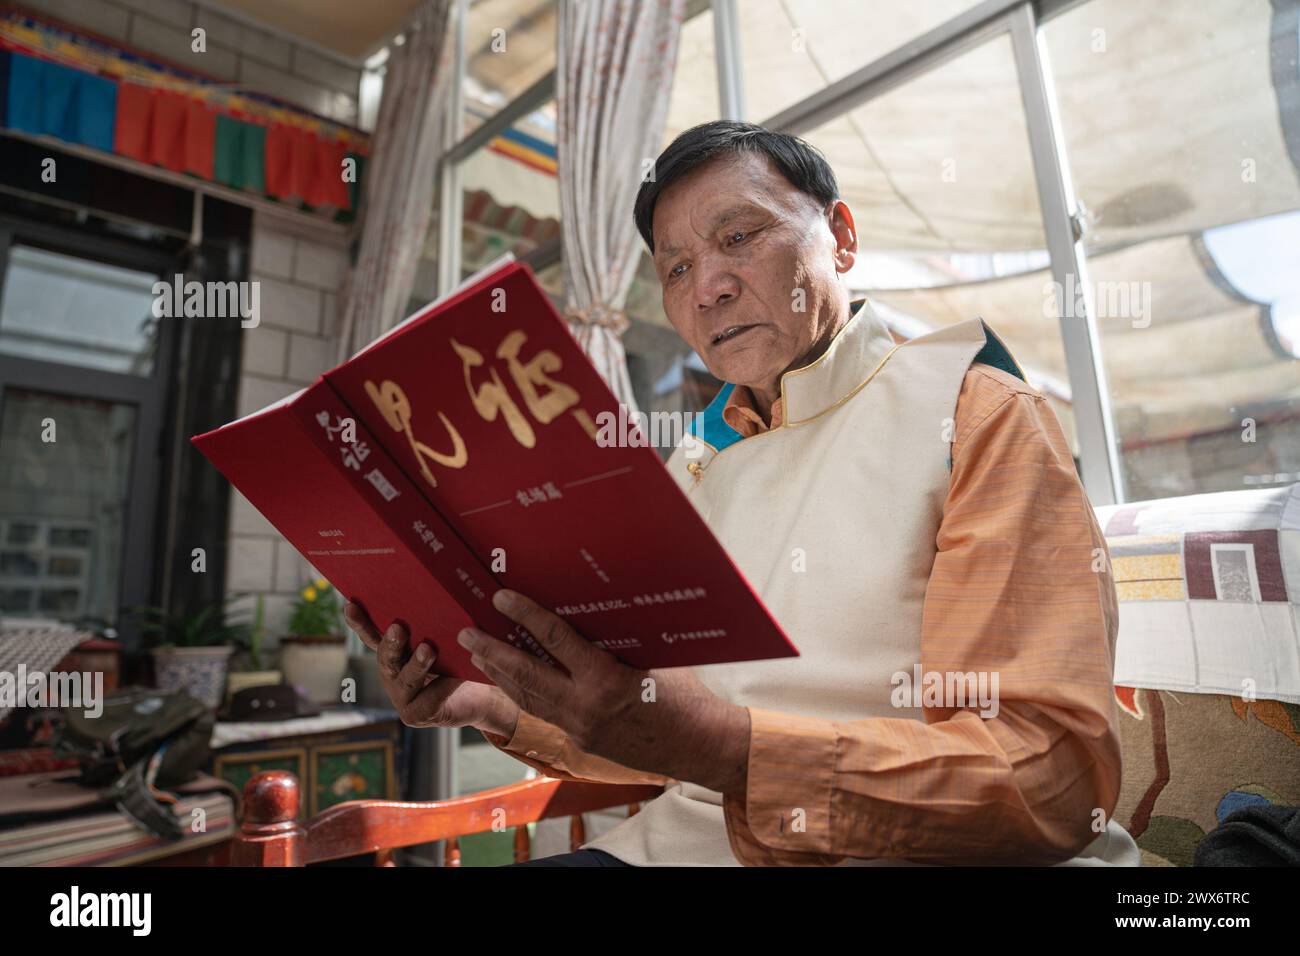 (240328) -- LHASA, March 28, 2024 (Xinhua) -- Phutsering reads a book at home in Lhasa, southwest China's Xizang Autonomous Region, March 23, 2024. Born in 1944 in Bainang County of Xigaze City, Phutsering was raised in a former serf family. A humble shack, situated near the manor where his mother toiled as a serf, served as his childhood home. Meanwhile, his father, employed at a separate manor, struggled to make ends meet by farming and crafting during lean months, barely generating sufficient income to cover the rent and taxes for their dwelling and fields. At the age of thirteen, he greete Stock Photo